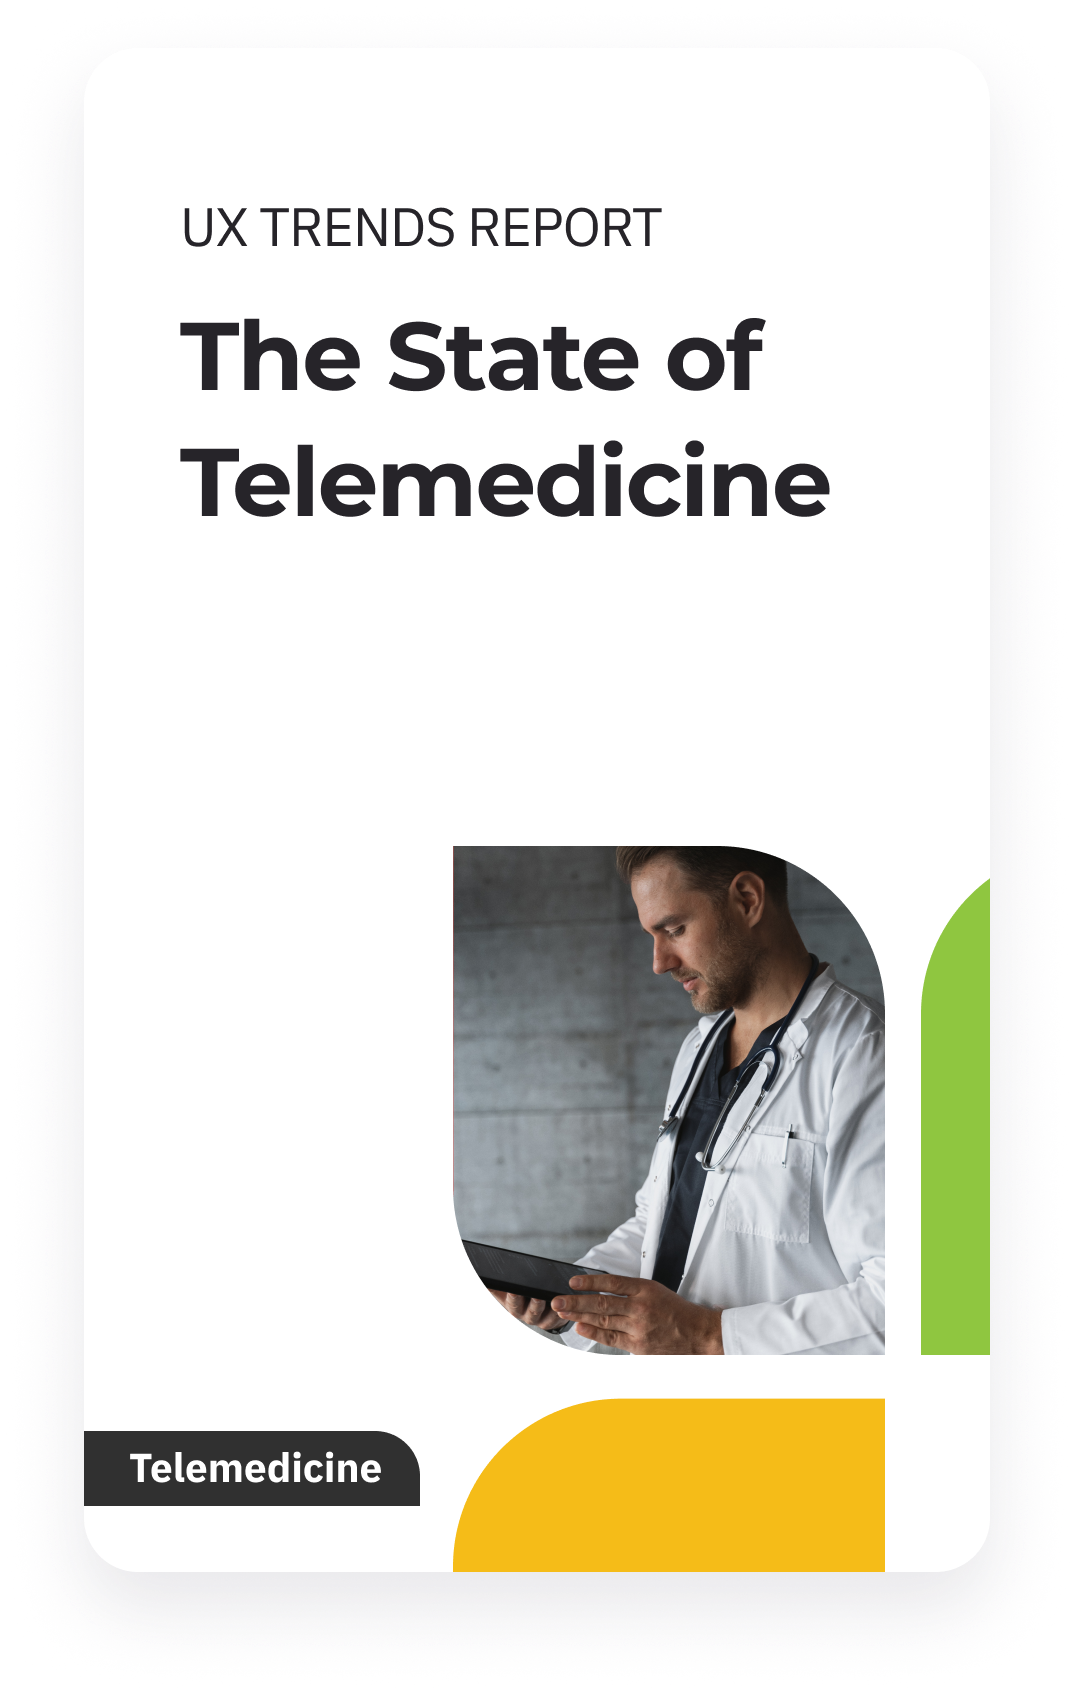 The State of Telemedicine